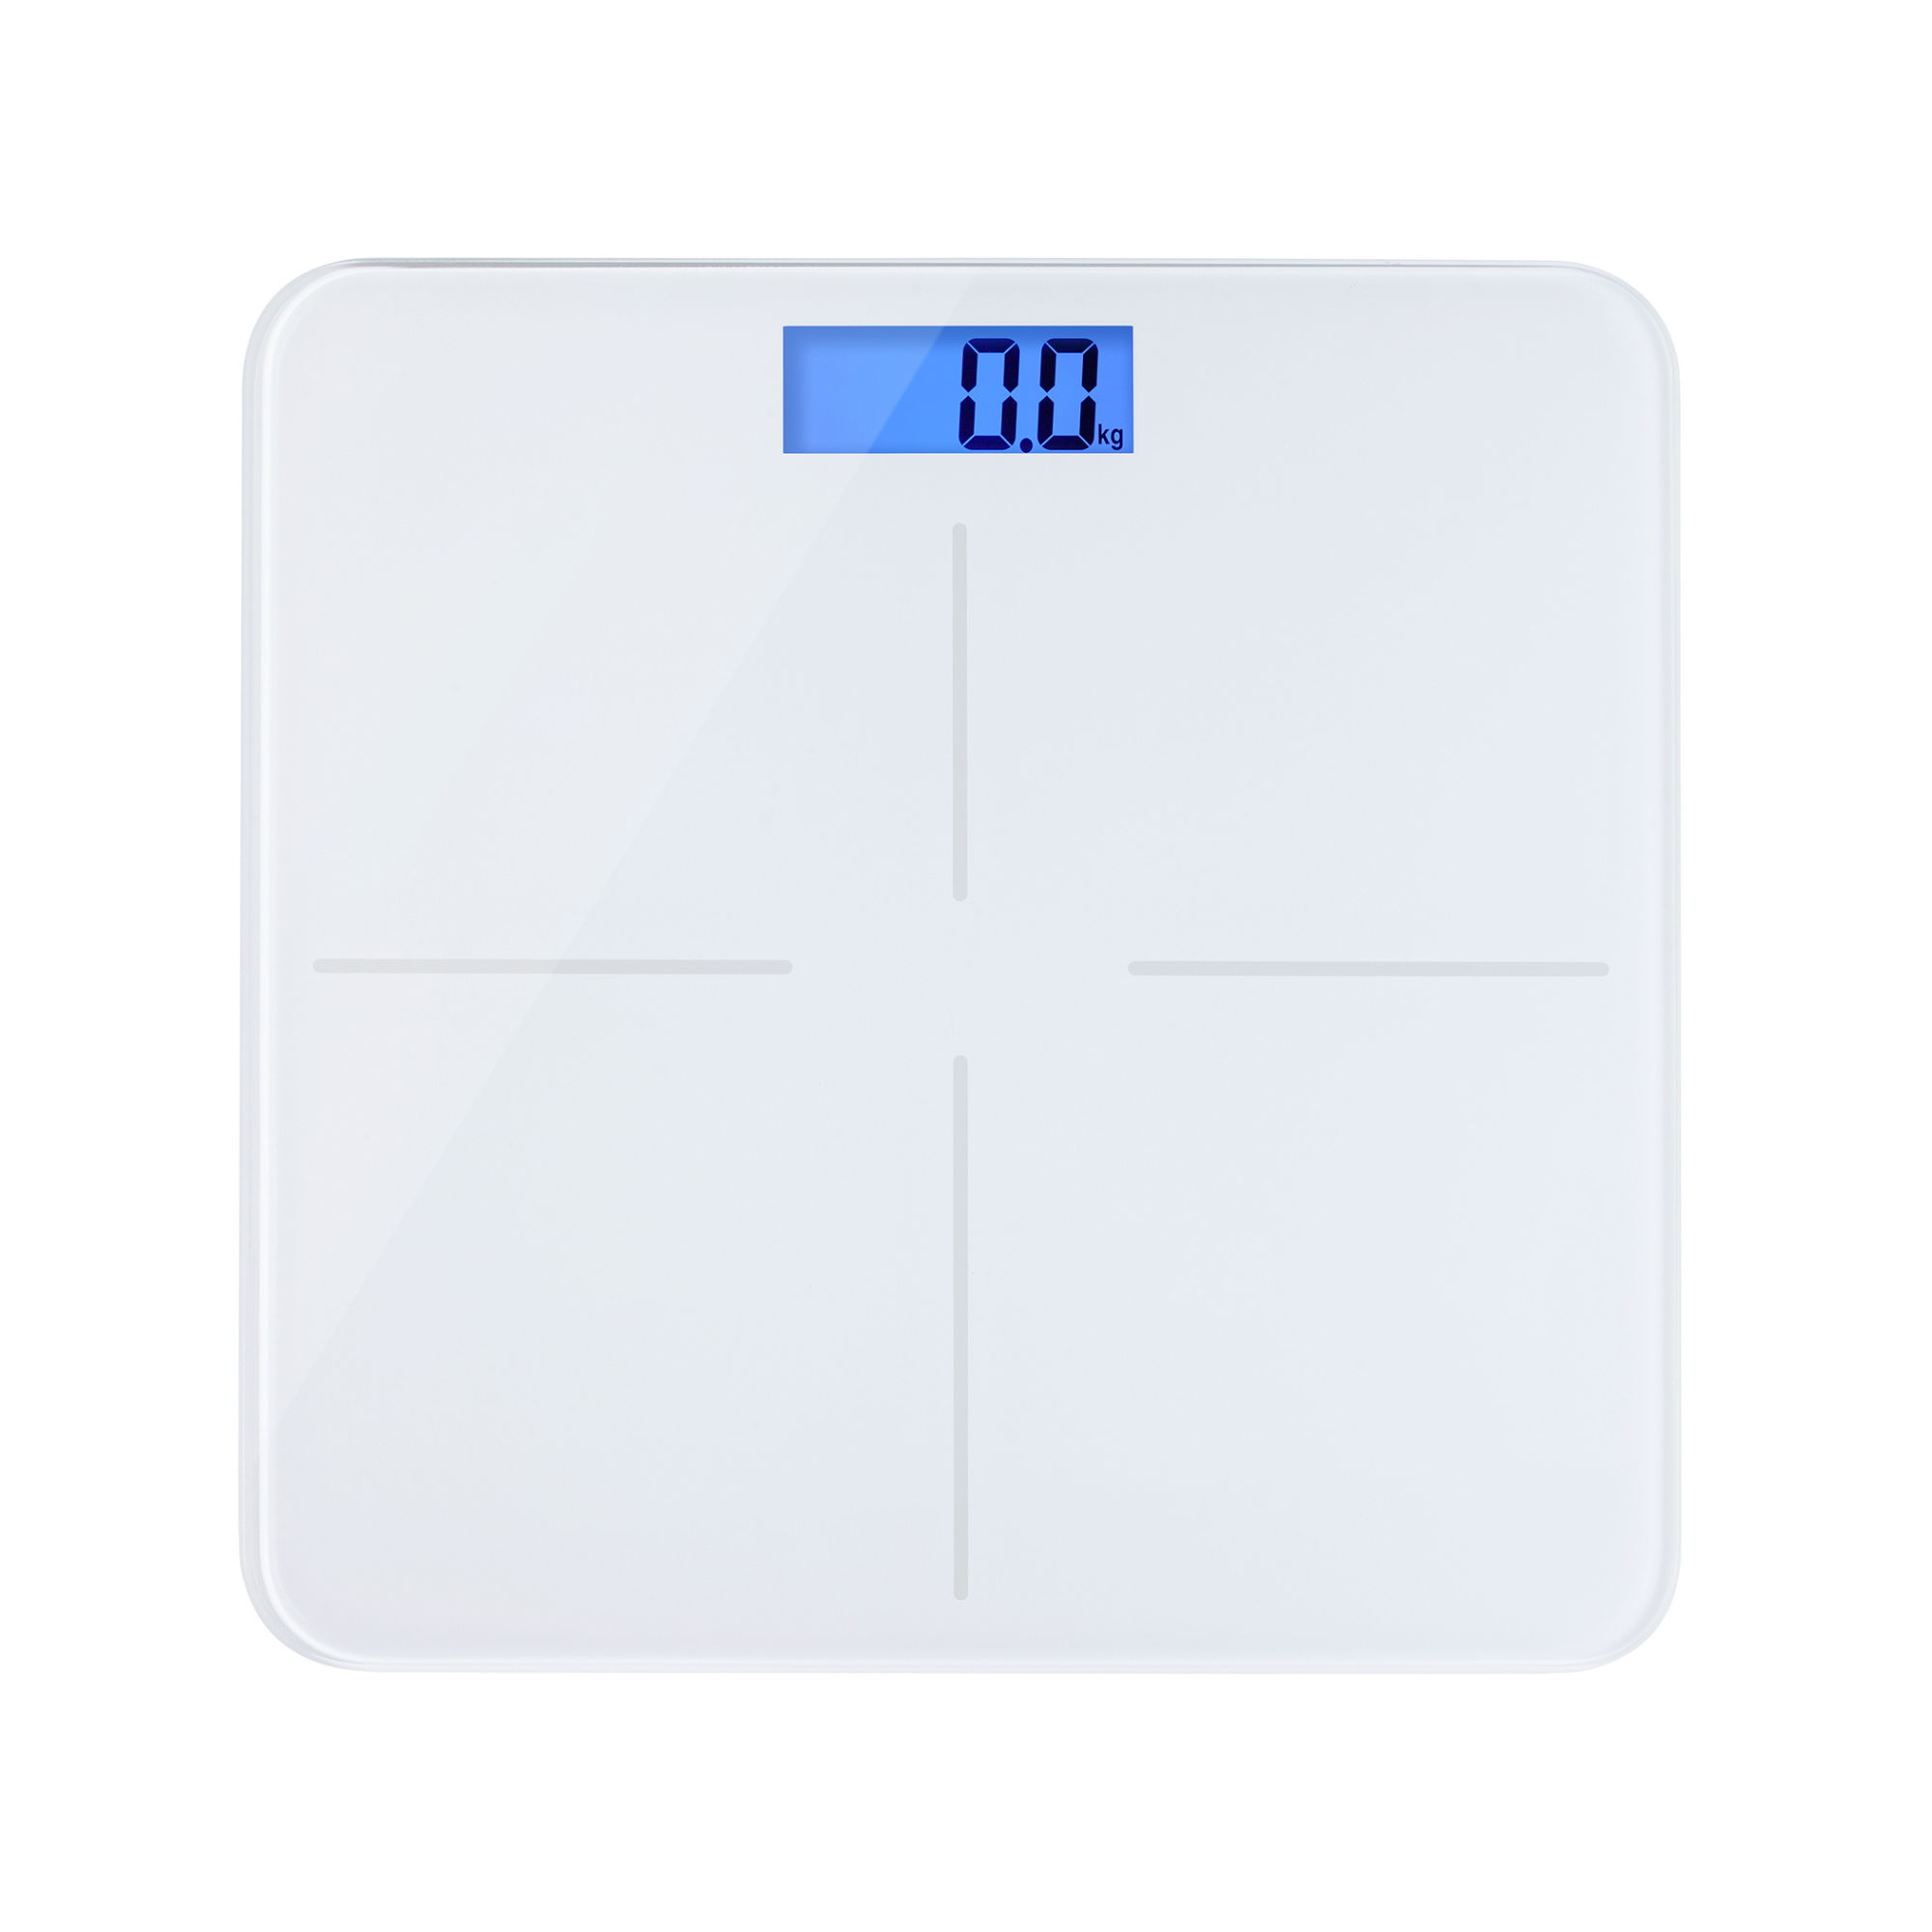 Taylor Precision Products Digital Bathroom Scale, Highly Accurate Body  Weight Scale & Reviews